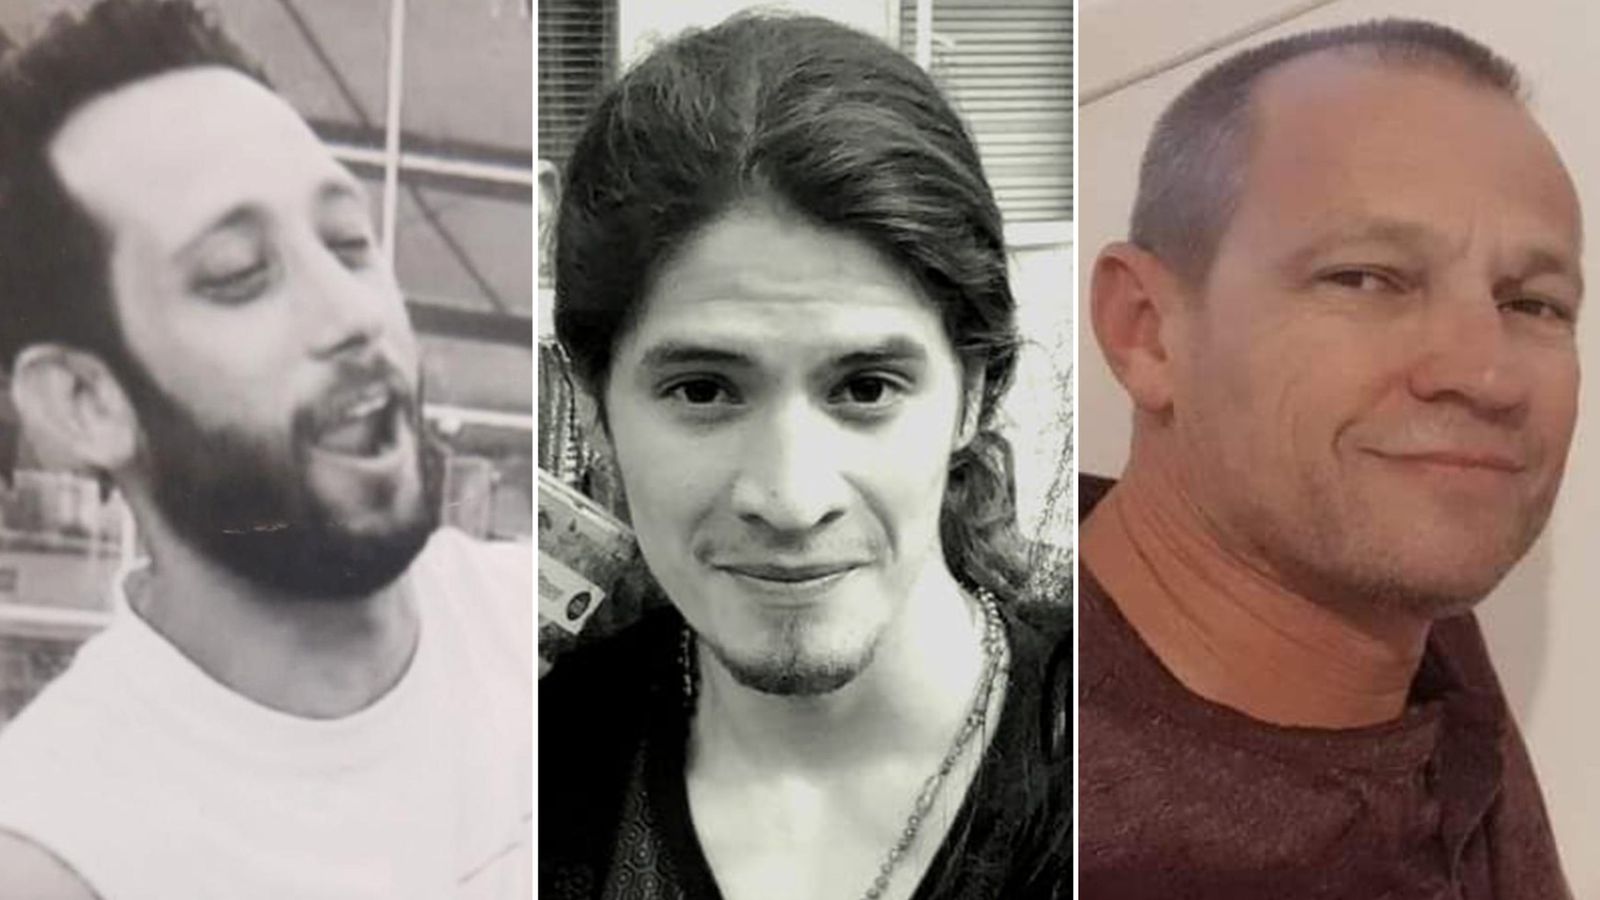 Bodies of three hostages taken from southern Israel on 7 October found in Gaza, IDF says